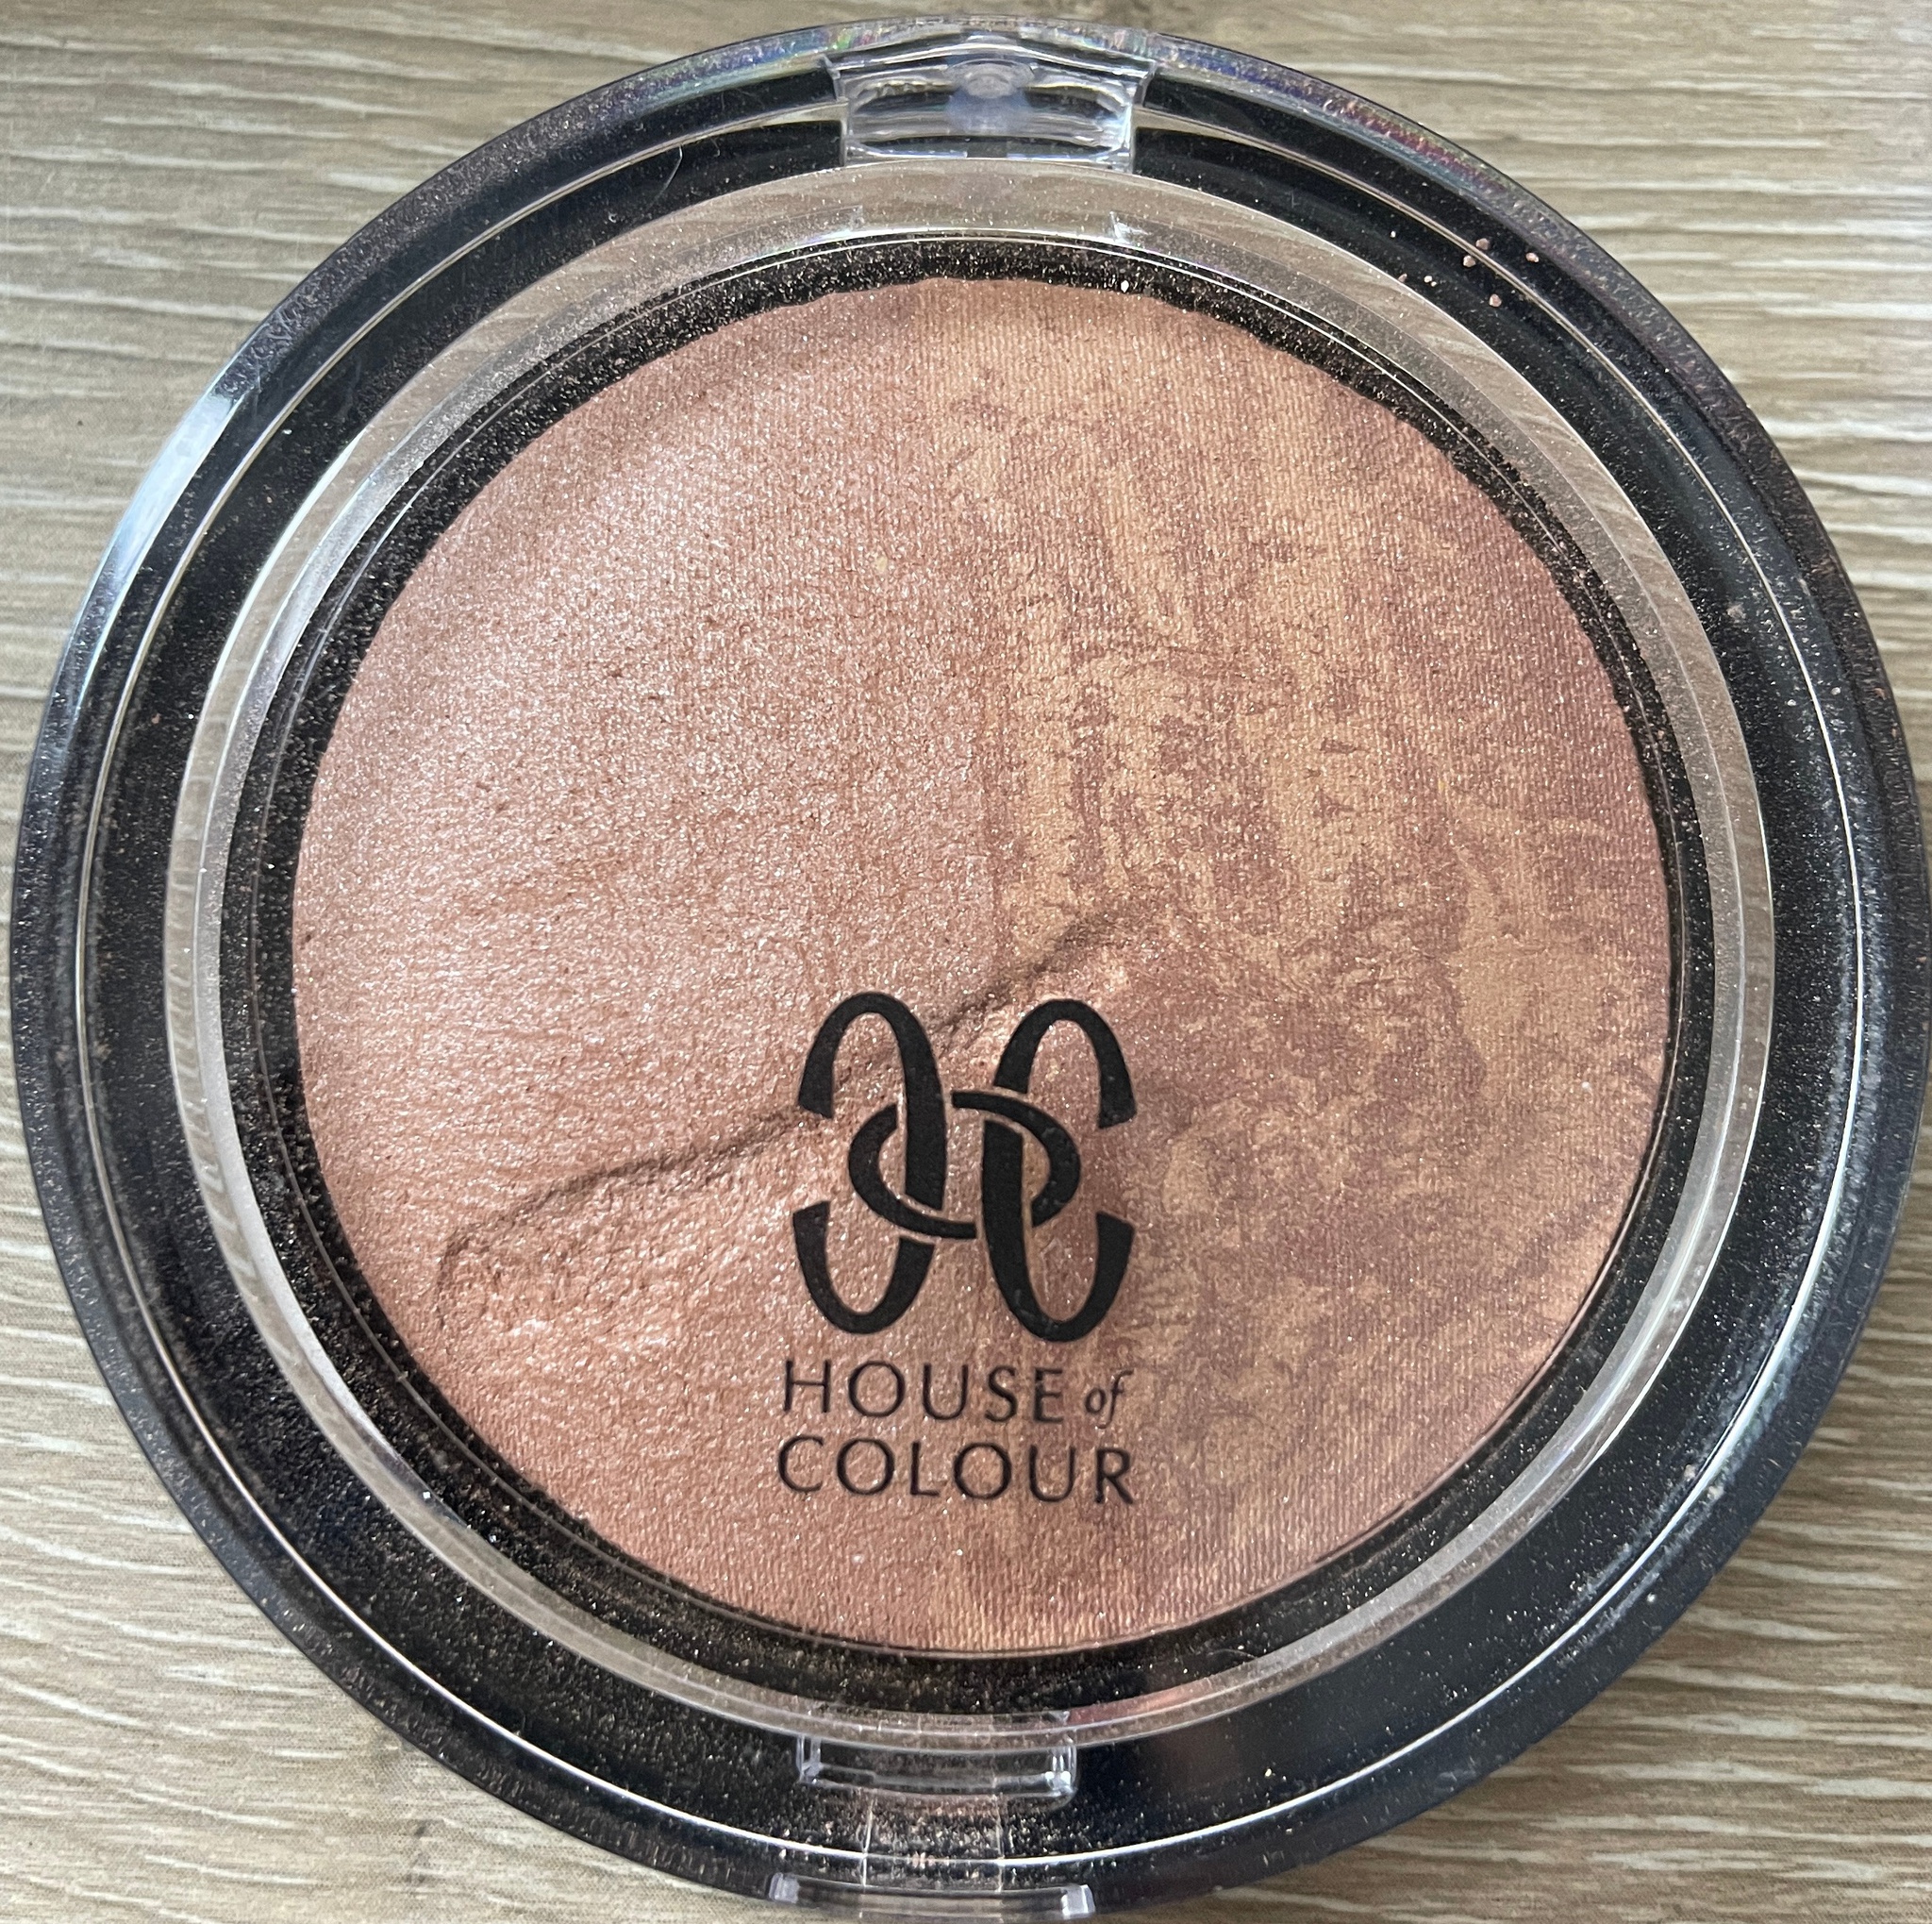 House of Colour Baked Bronzing Powder #301